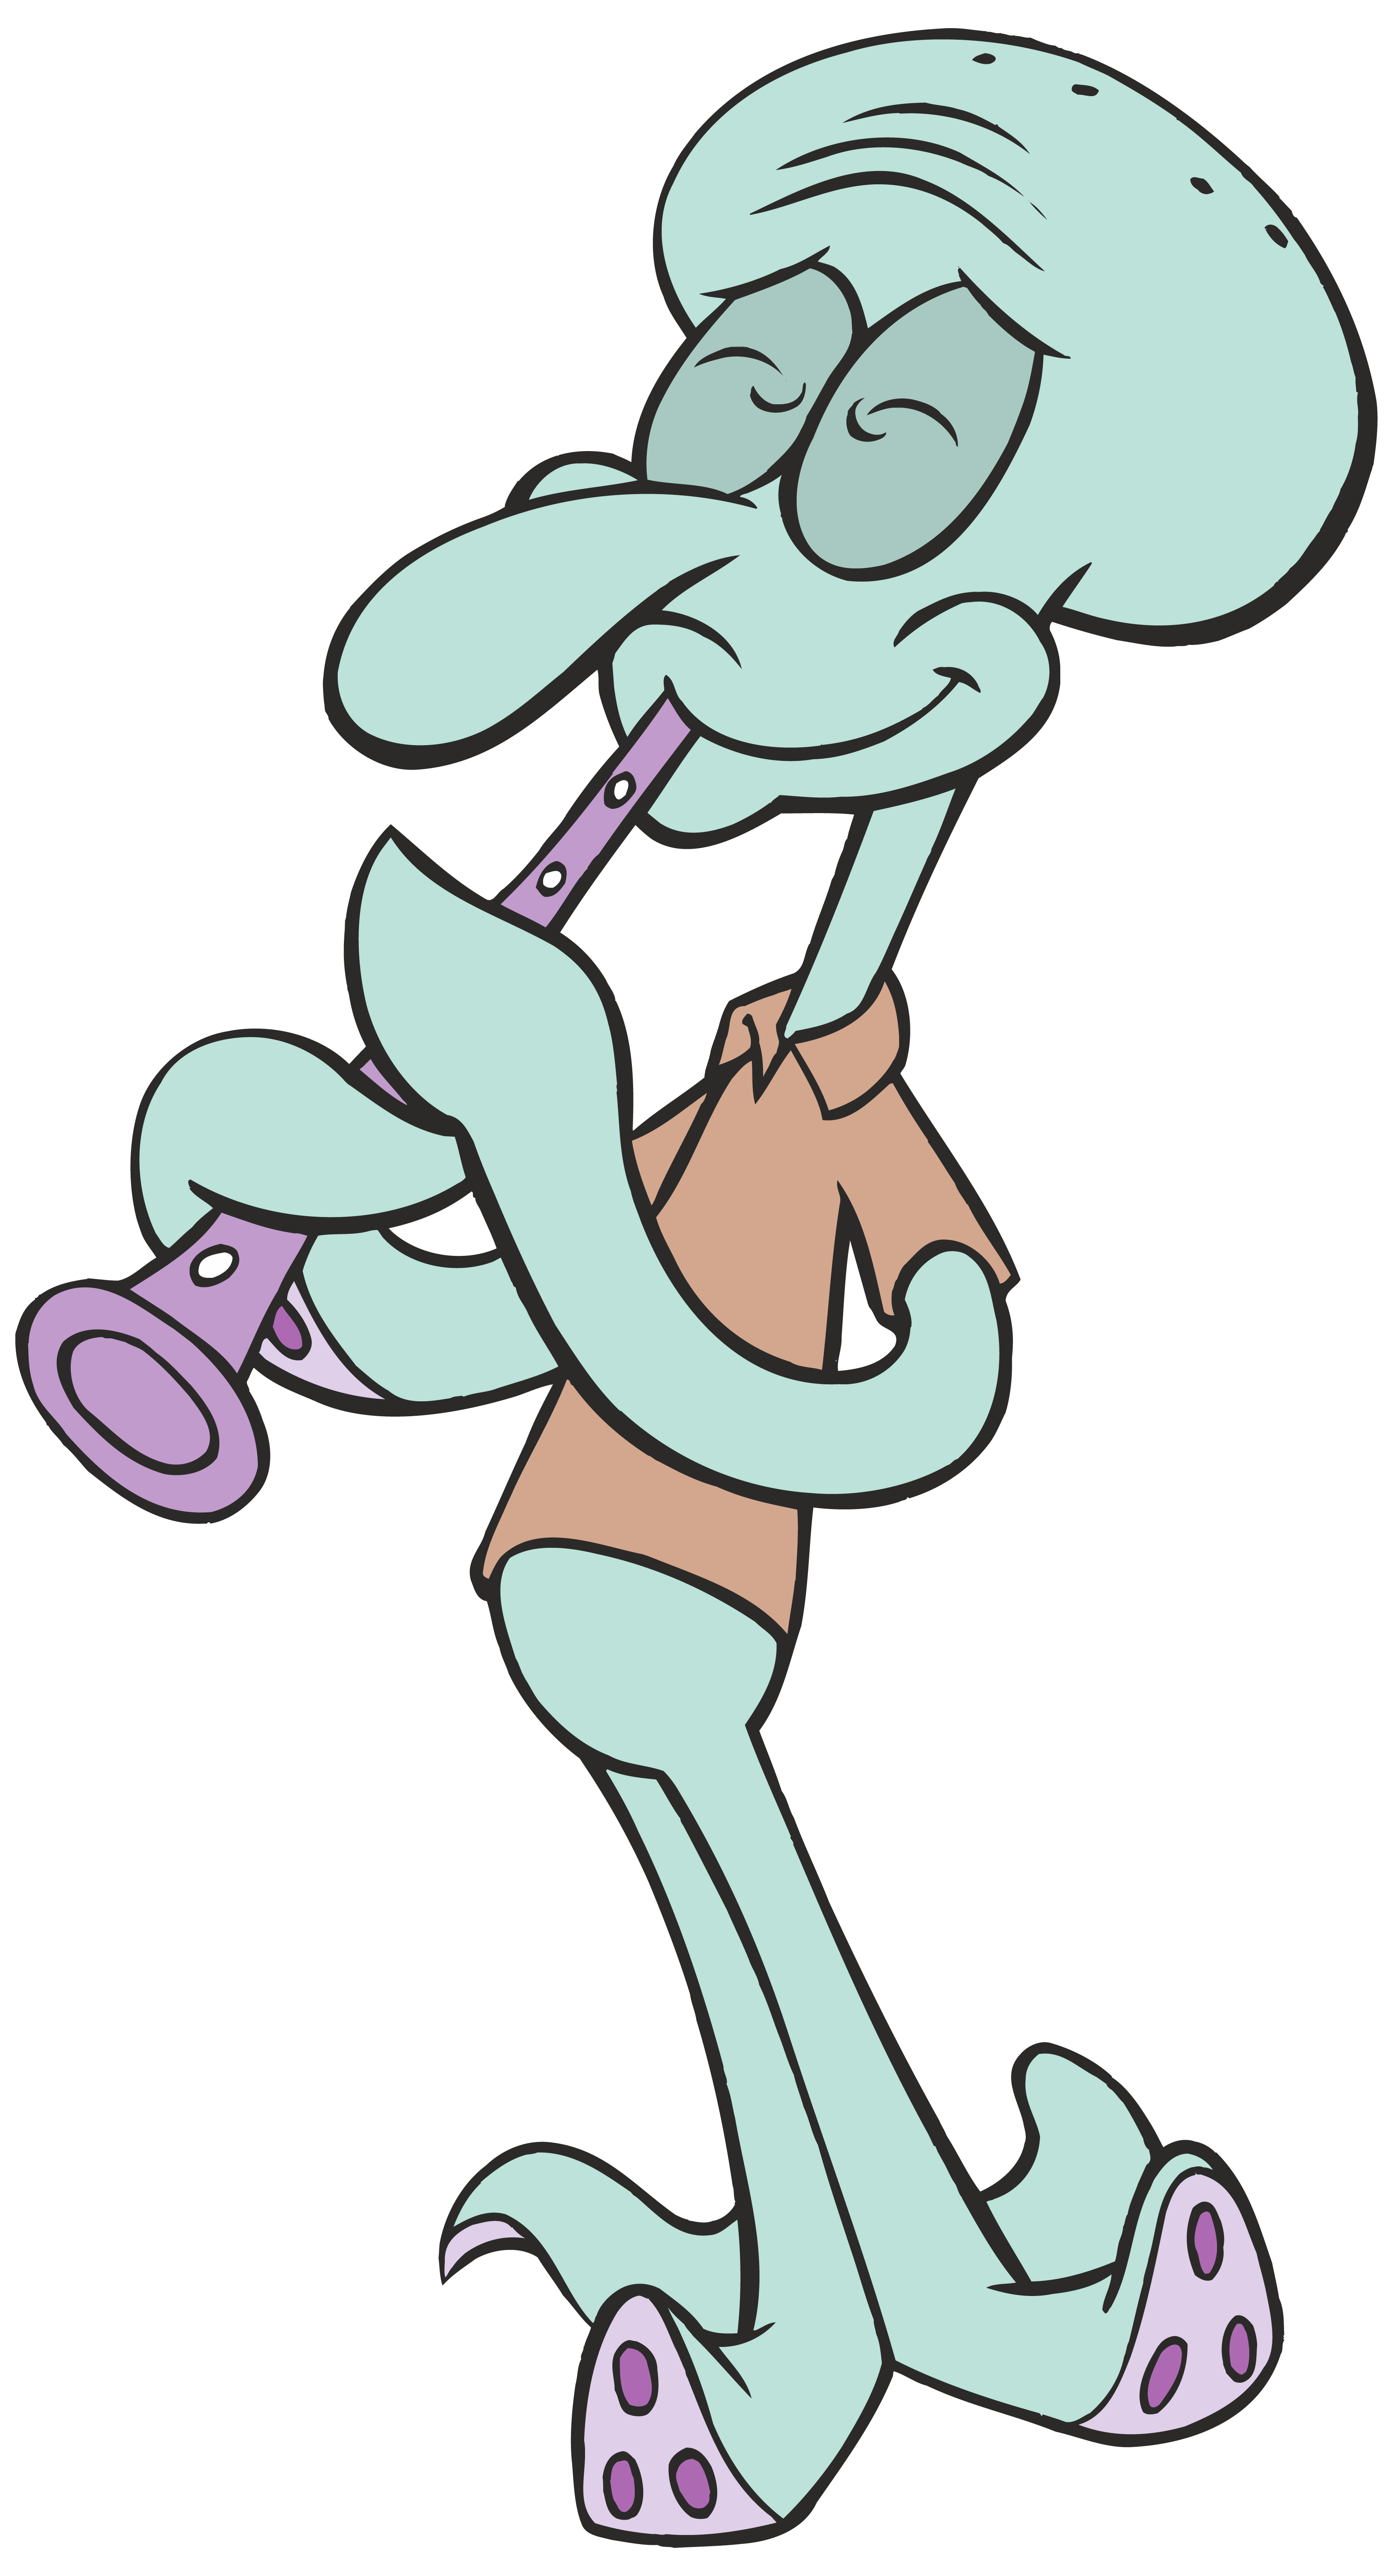 Frustrated clipart disposition. Squidward tentacles spongebob png